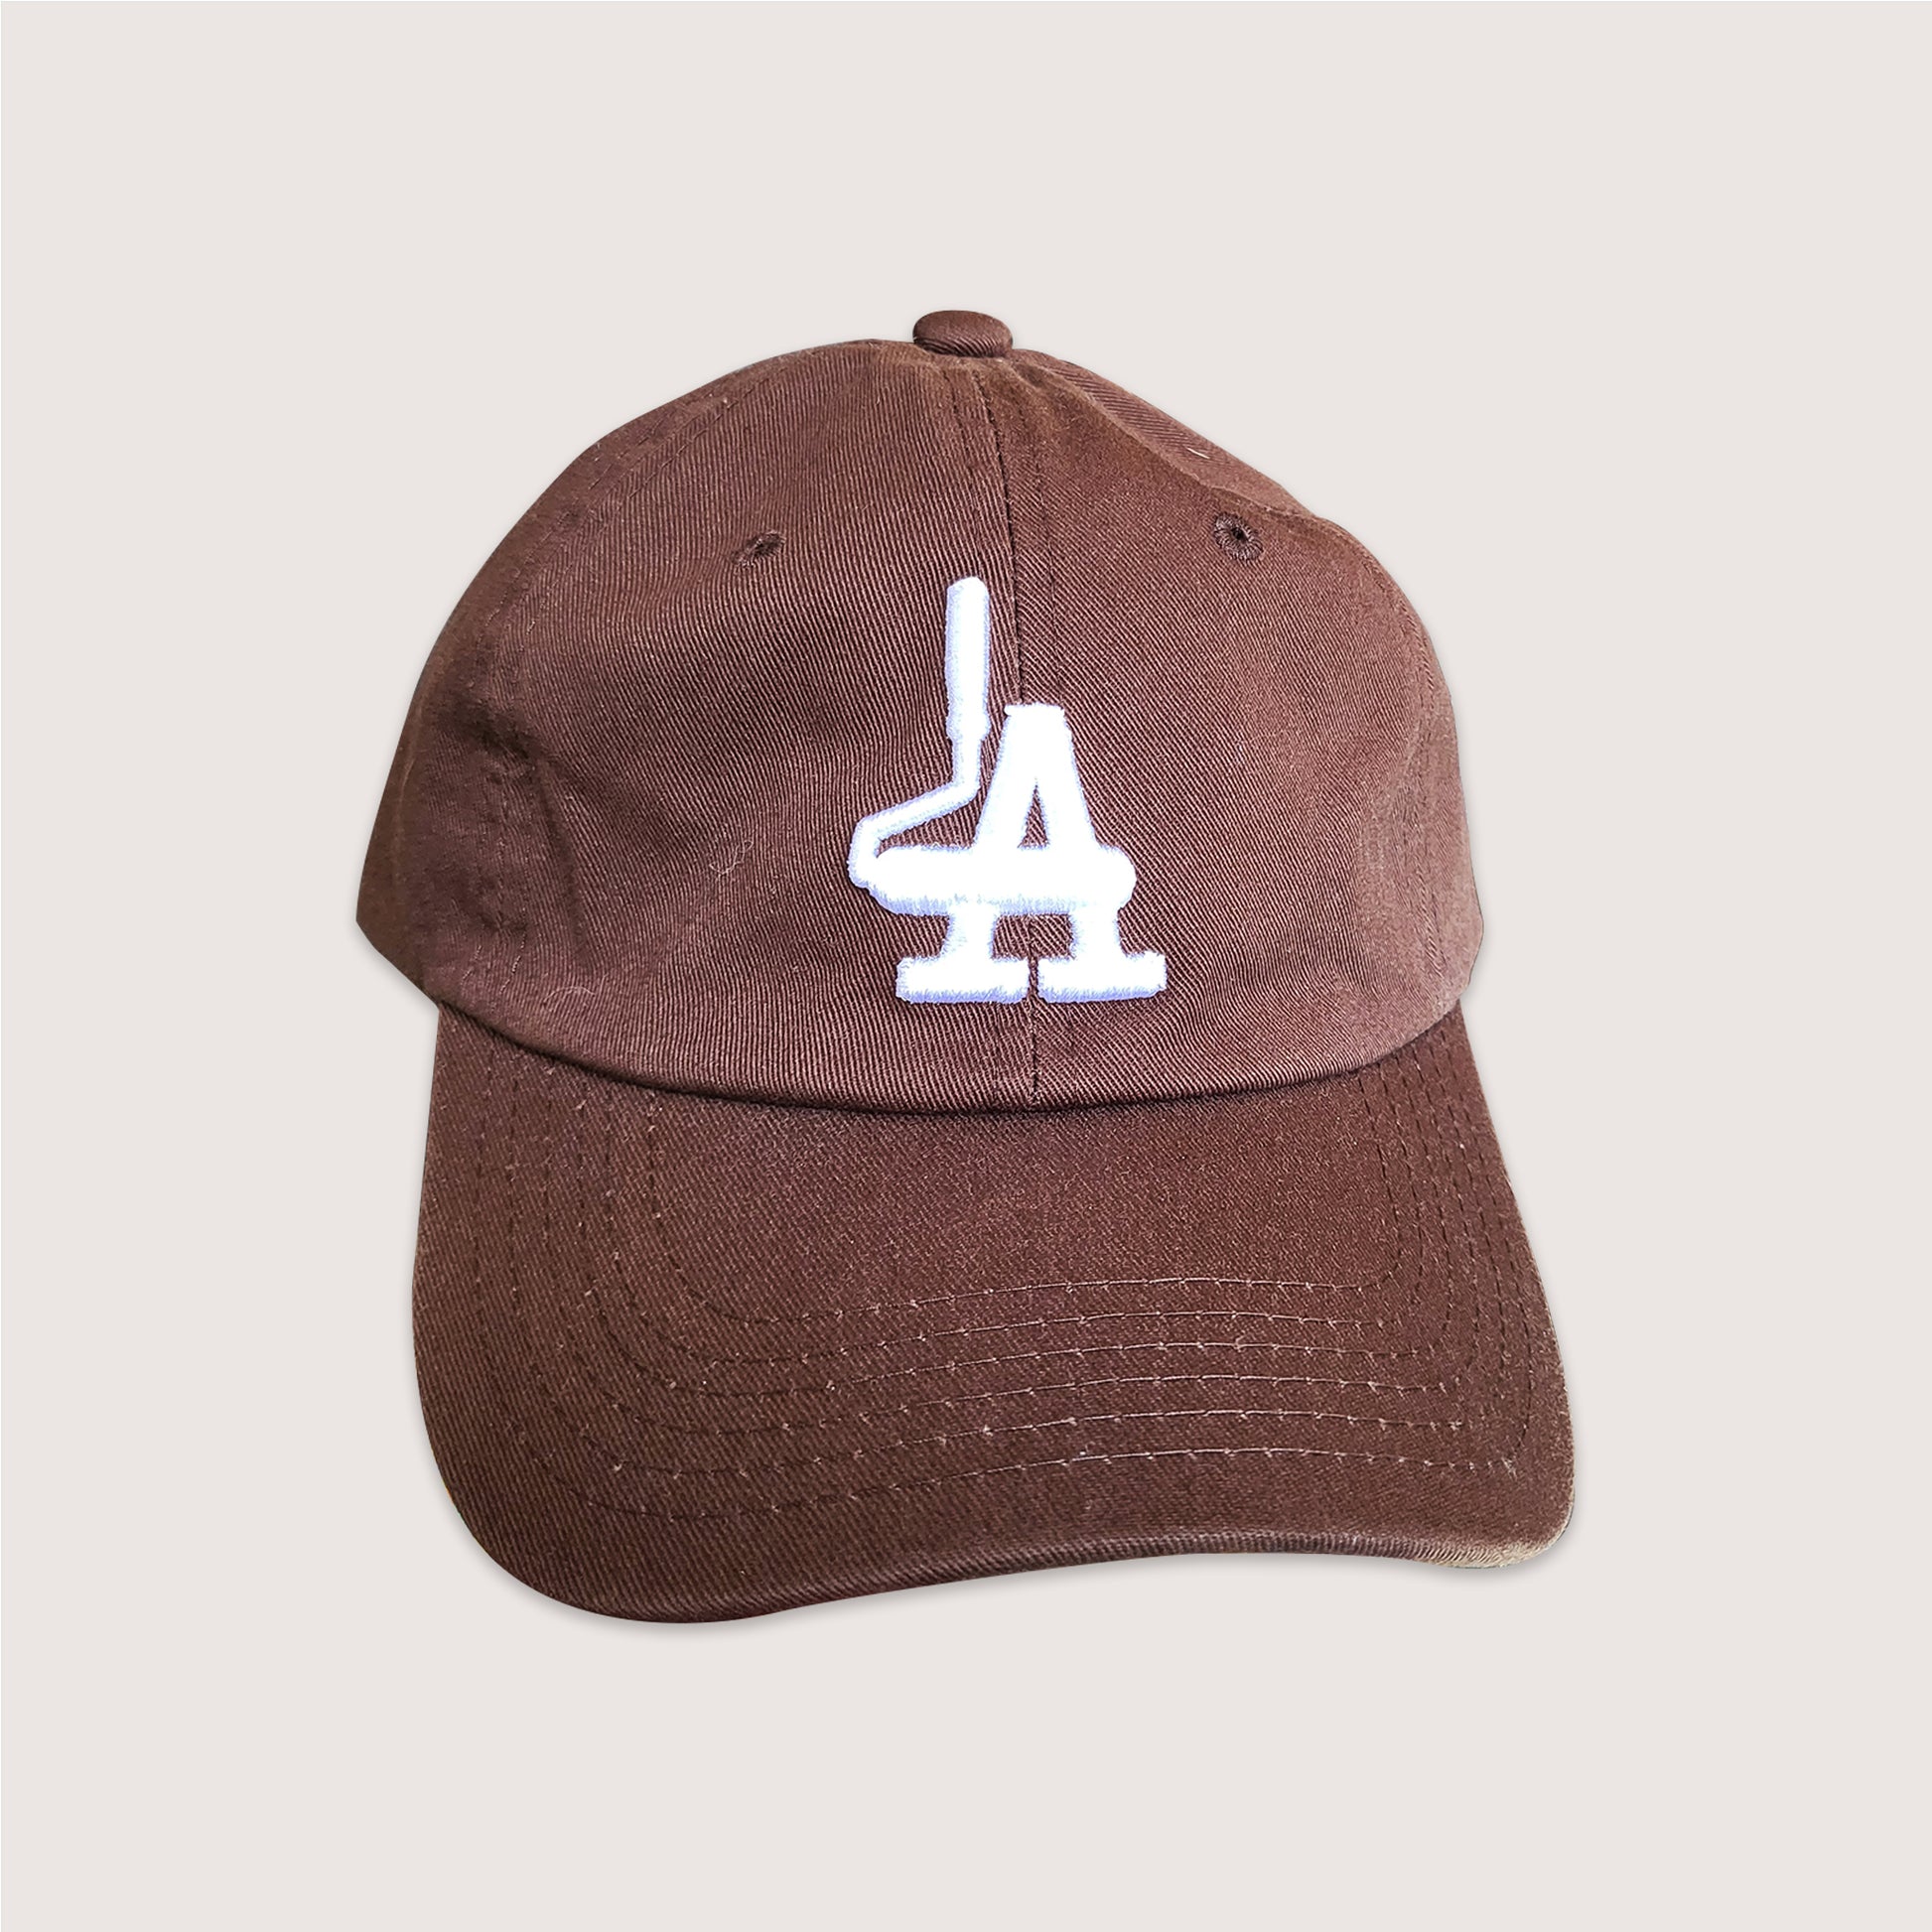 Locally branded unstructured cap in brown with white puff embroidery detail.